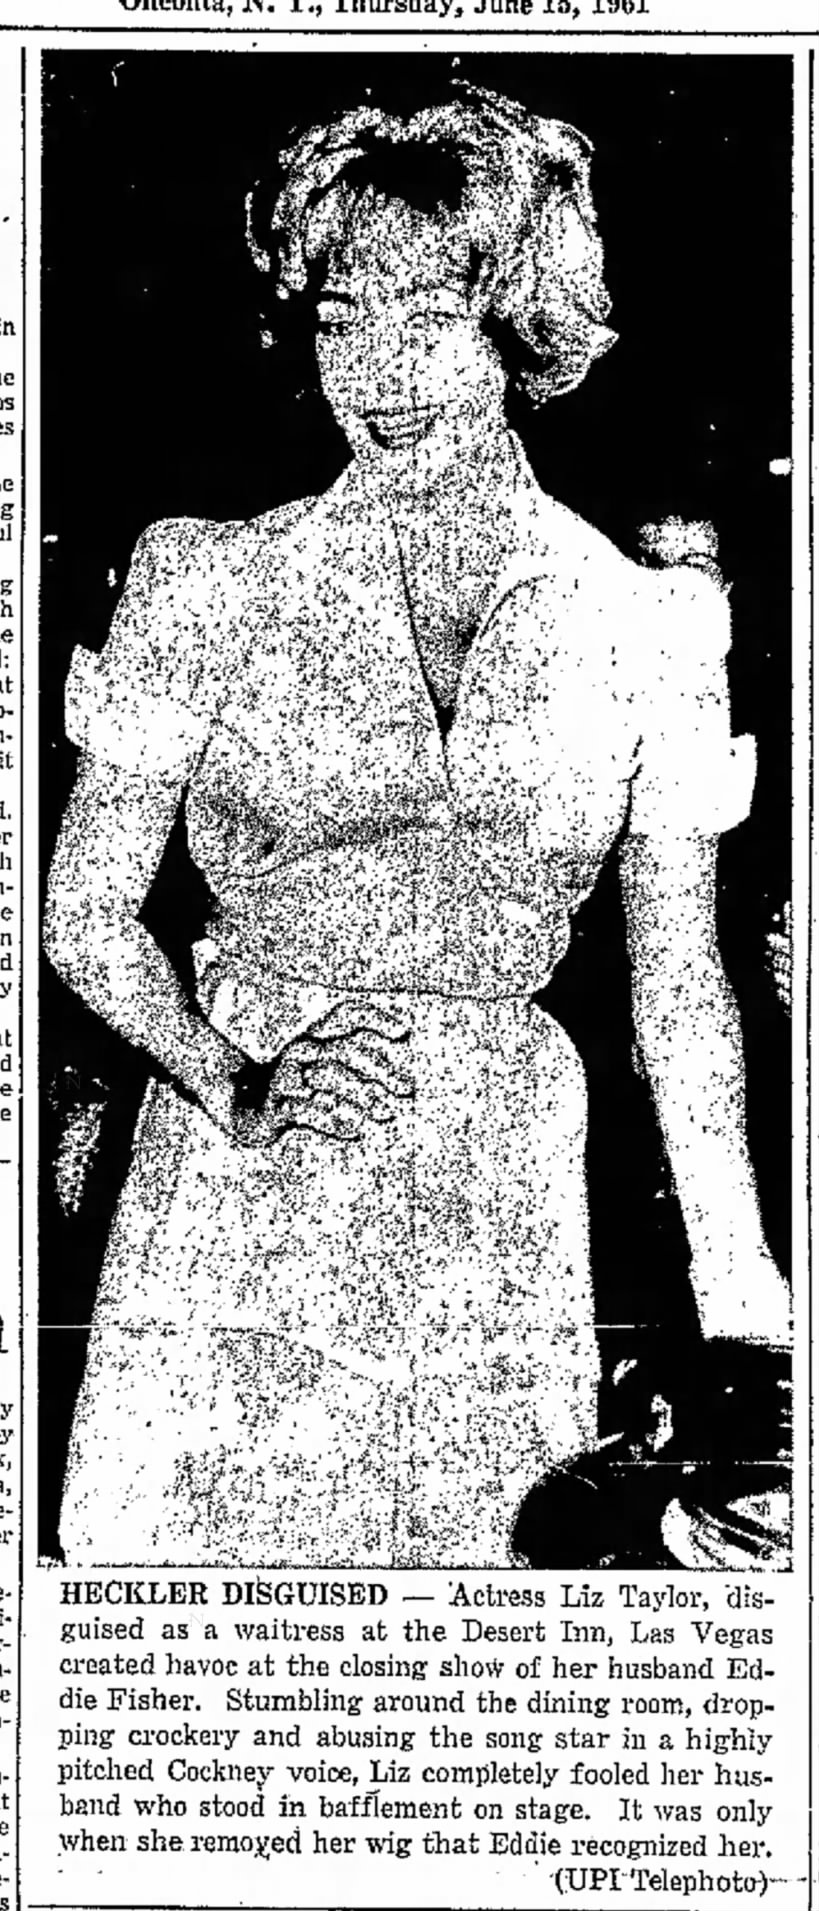 Heckler Disguised, The Oneonta Star (Oneonta, New York), 15 June 1961, p 1